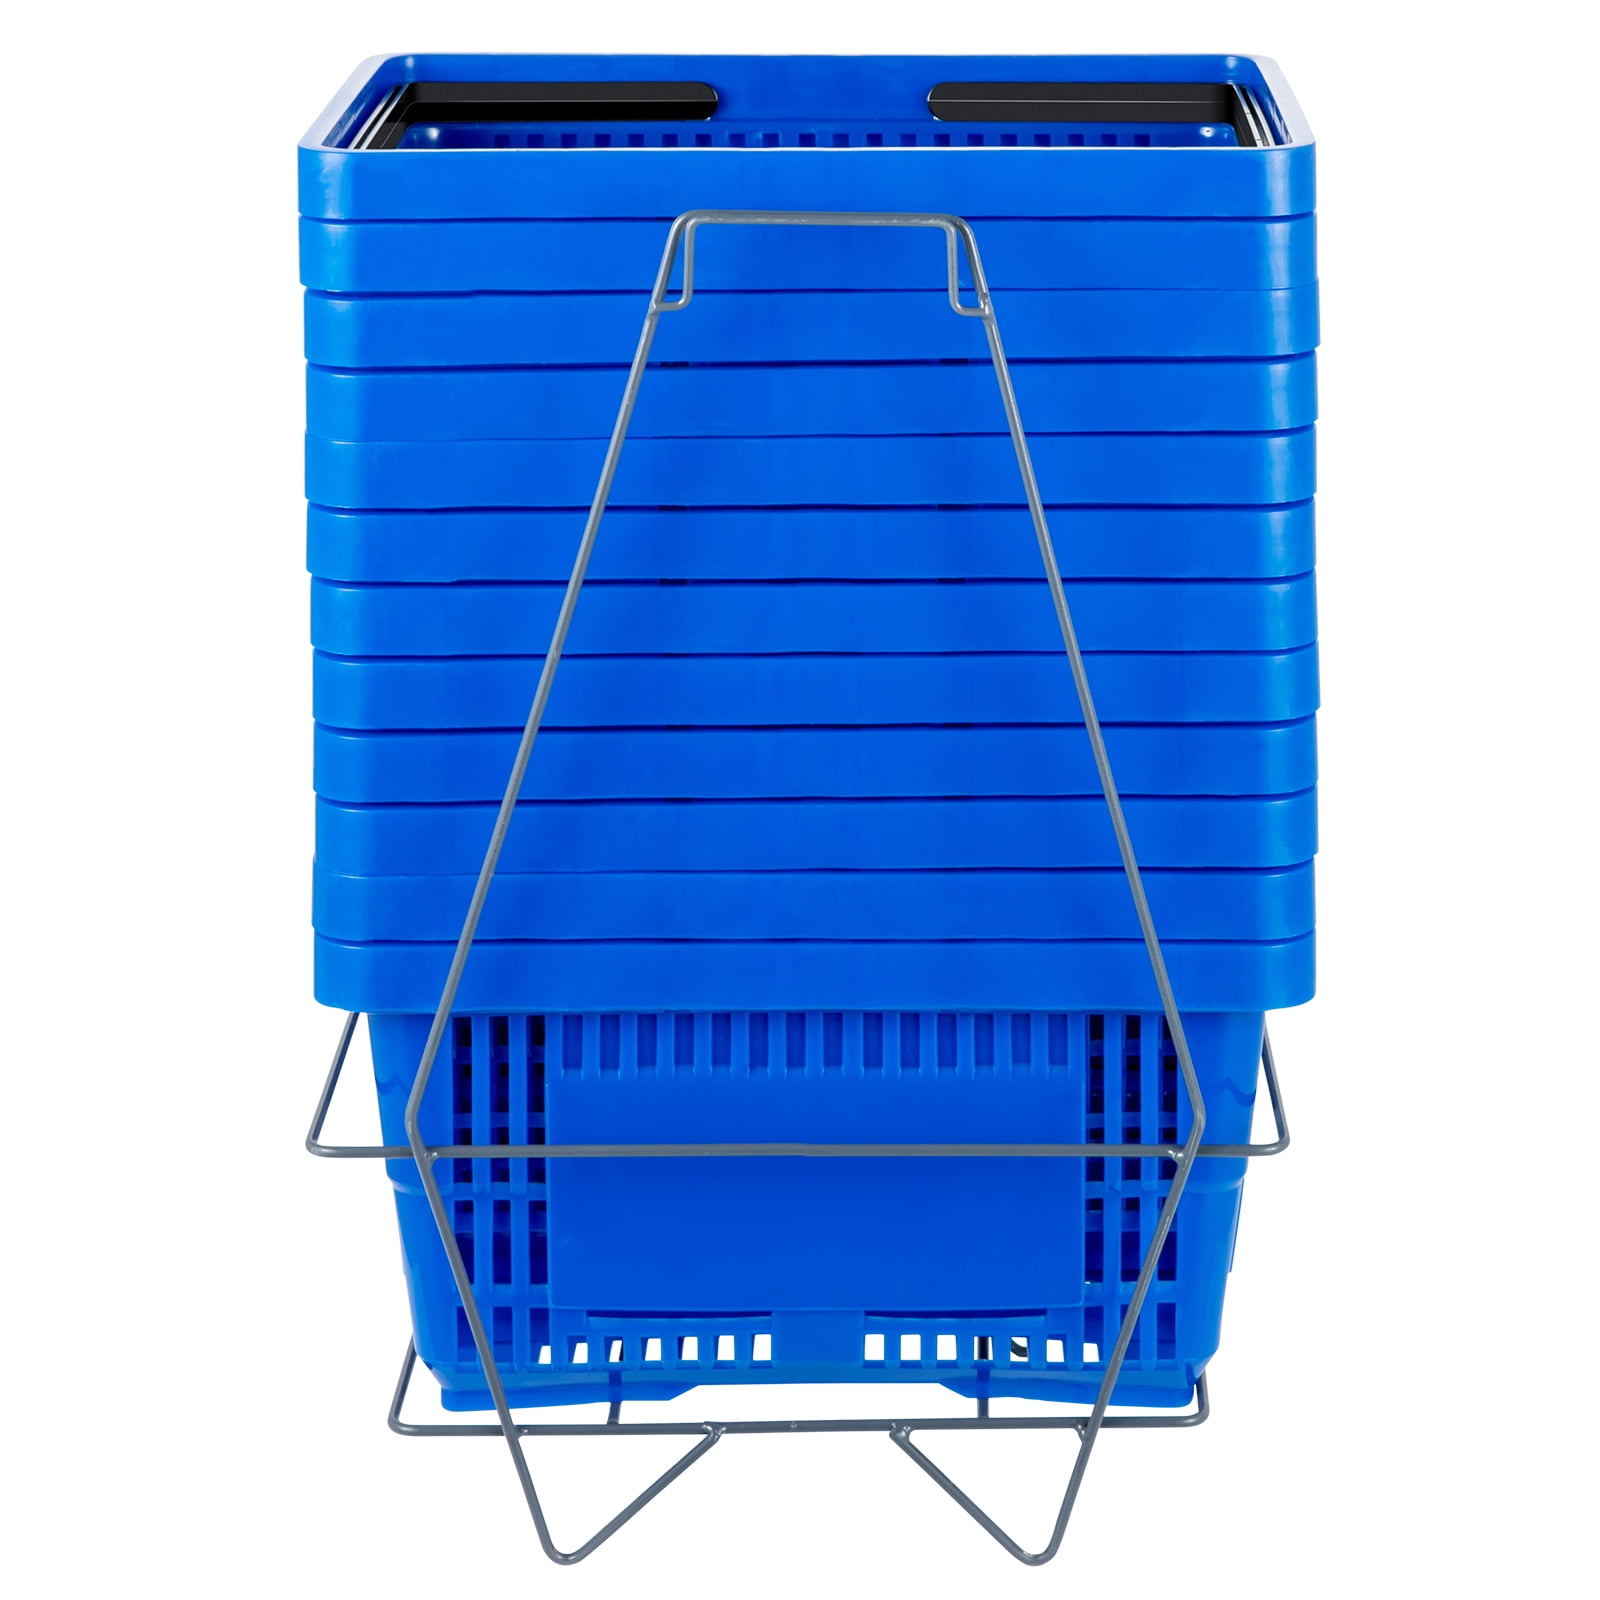 Blue Plastic Shopping Basket with Plastic Handle, Large, 19-3/8LX  13-1/4WX 10H - Lot of 12